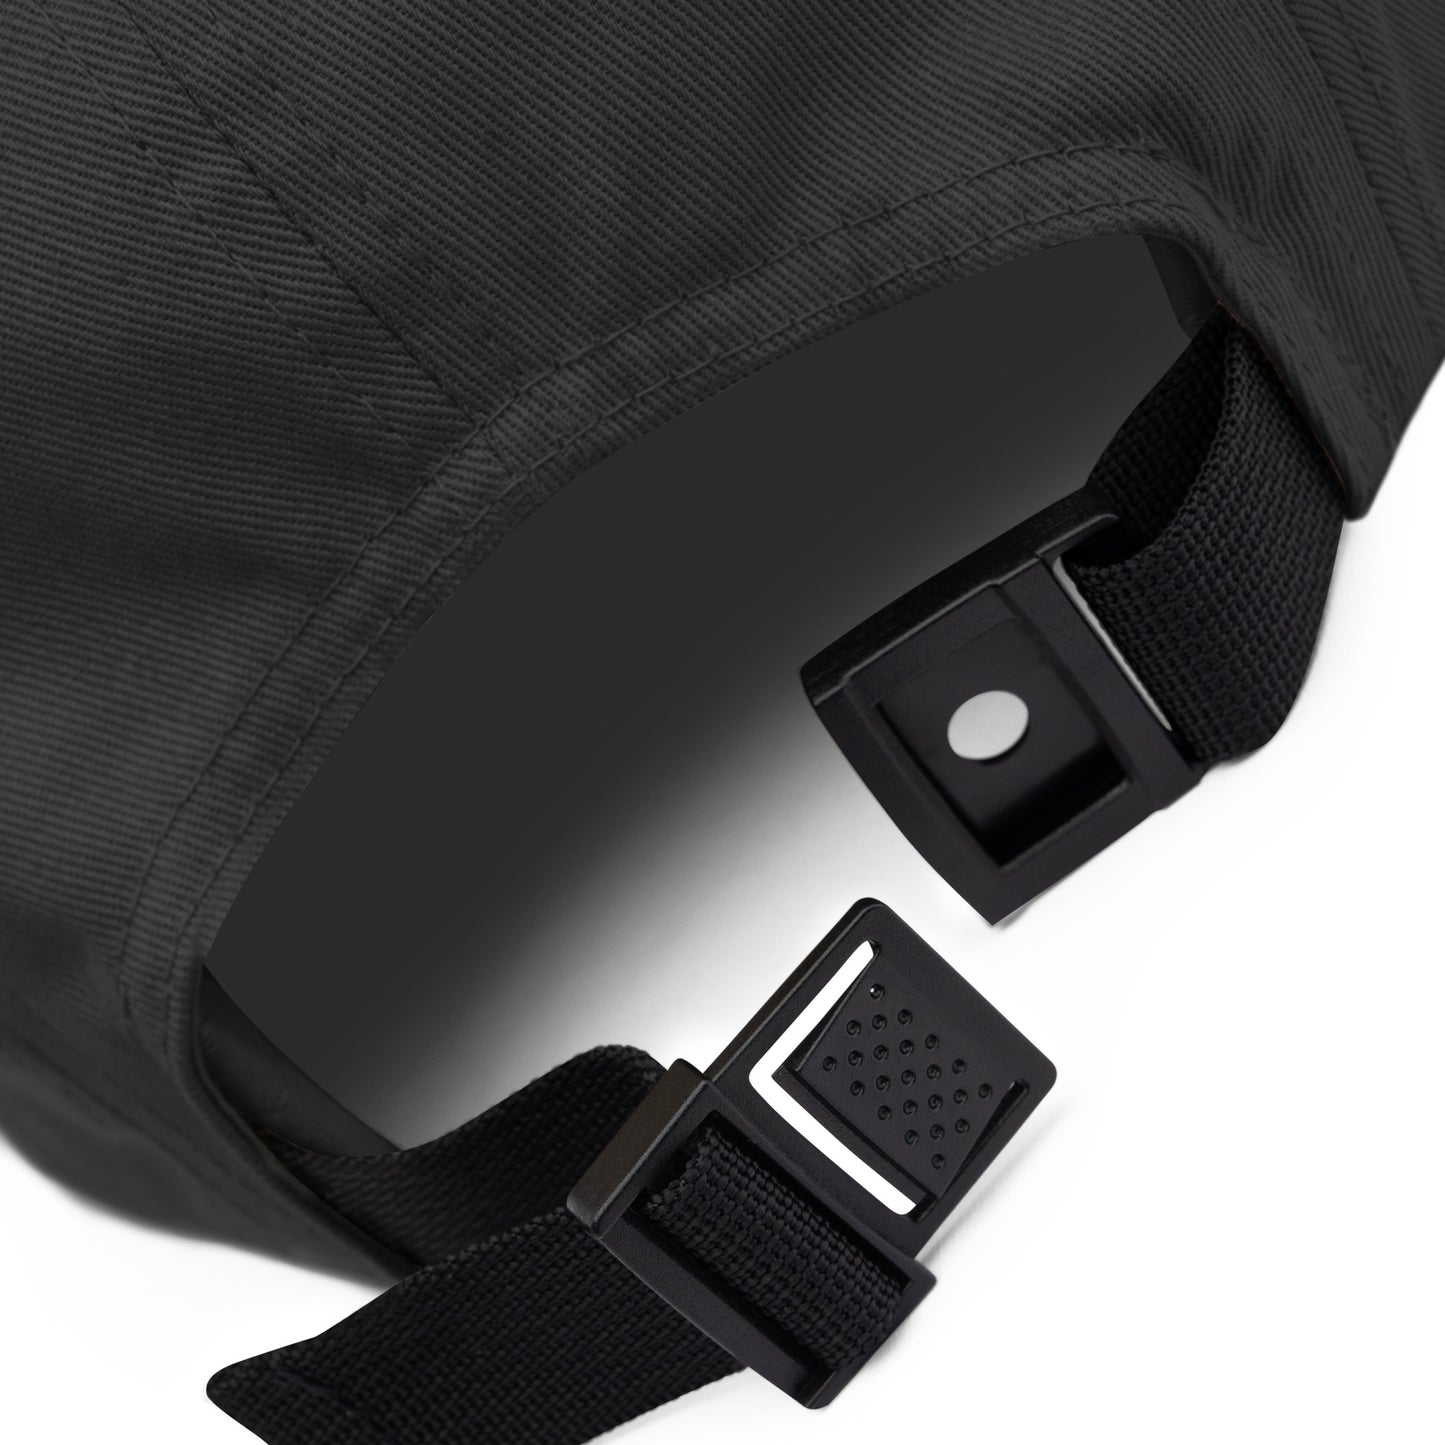 Image shows nylon strap and clip of five panel camper-style cap